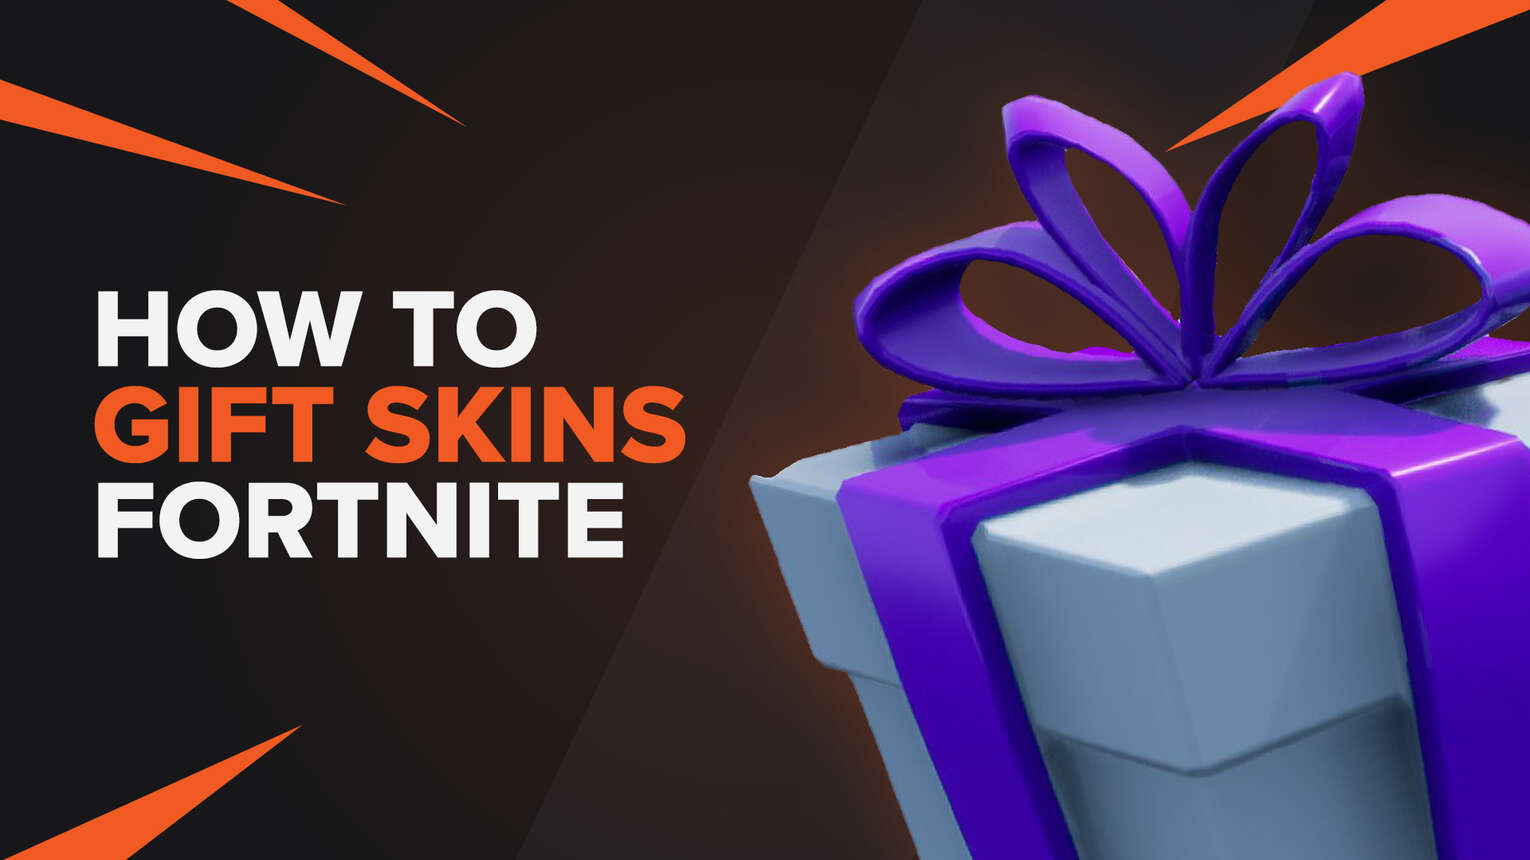 How To Gift Skins in Fortnite